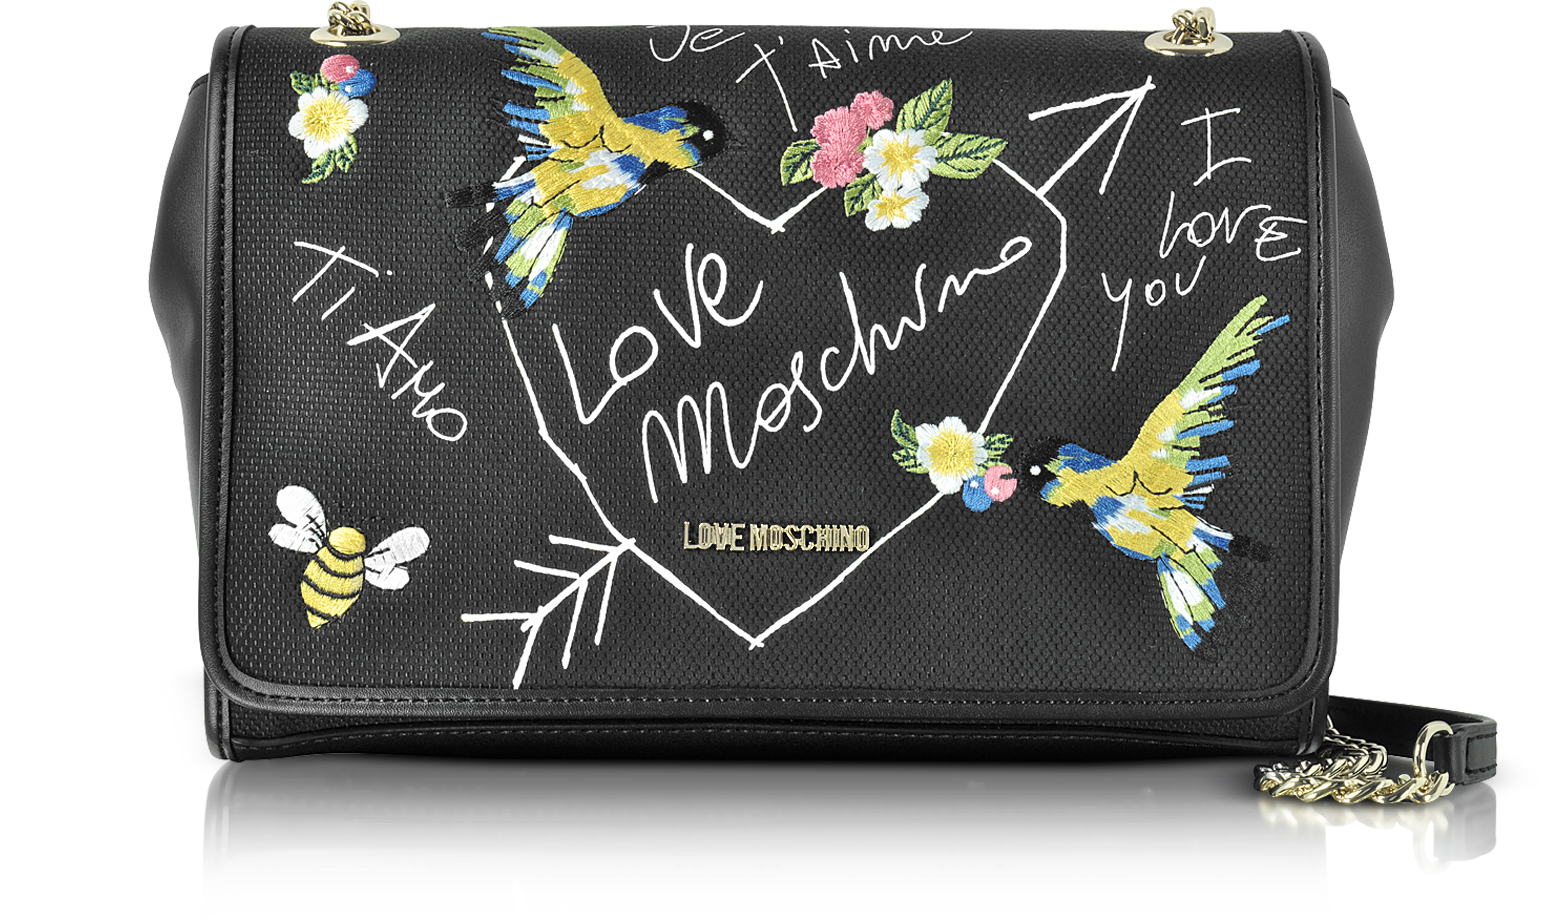 about you love moschino